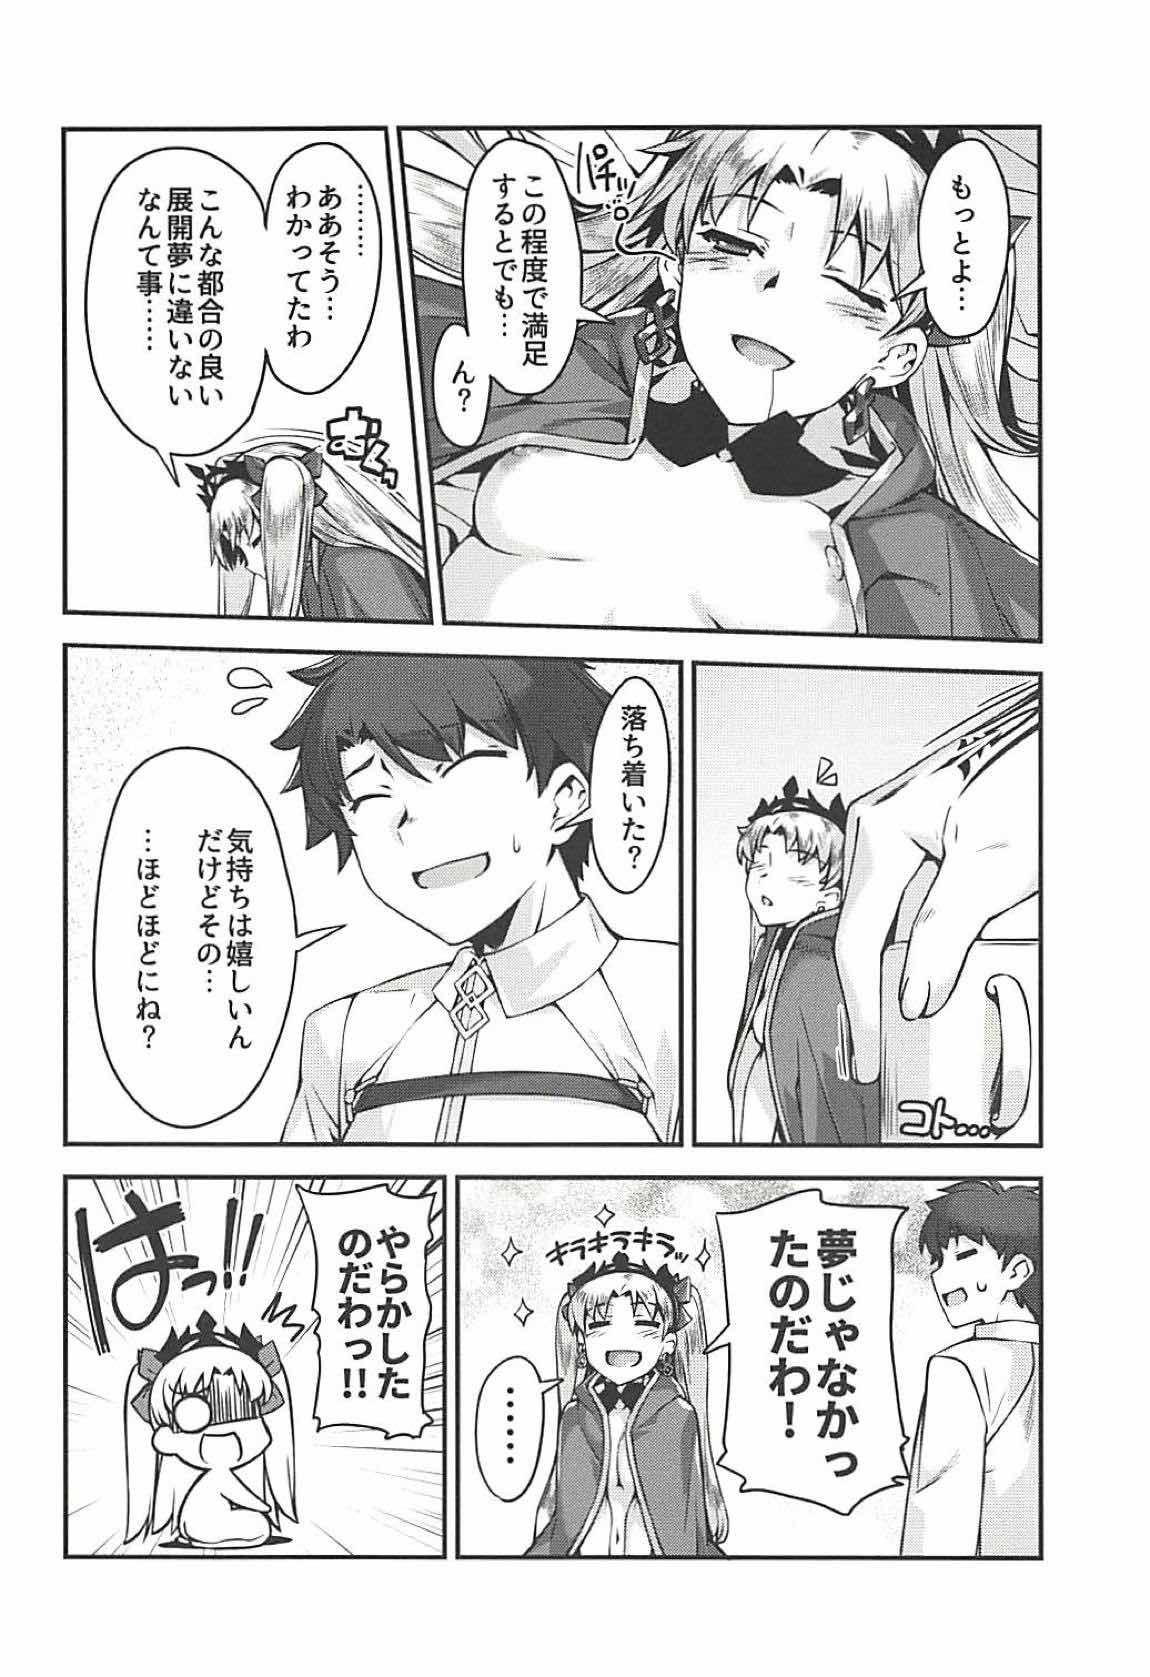 (C94) [Kansyouyou Marmotte (Mr.Lostman)] Ere-chan to! (Fate/Grand Order) page 18 full